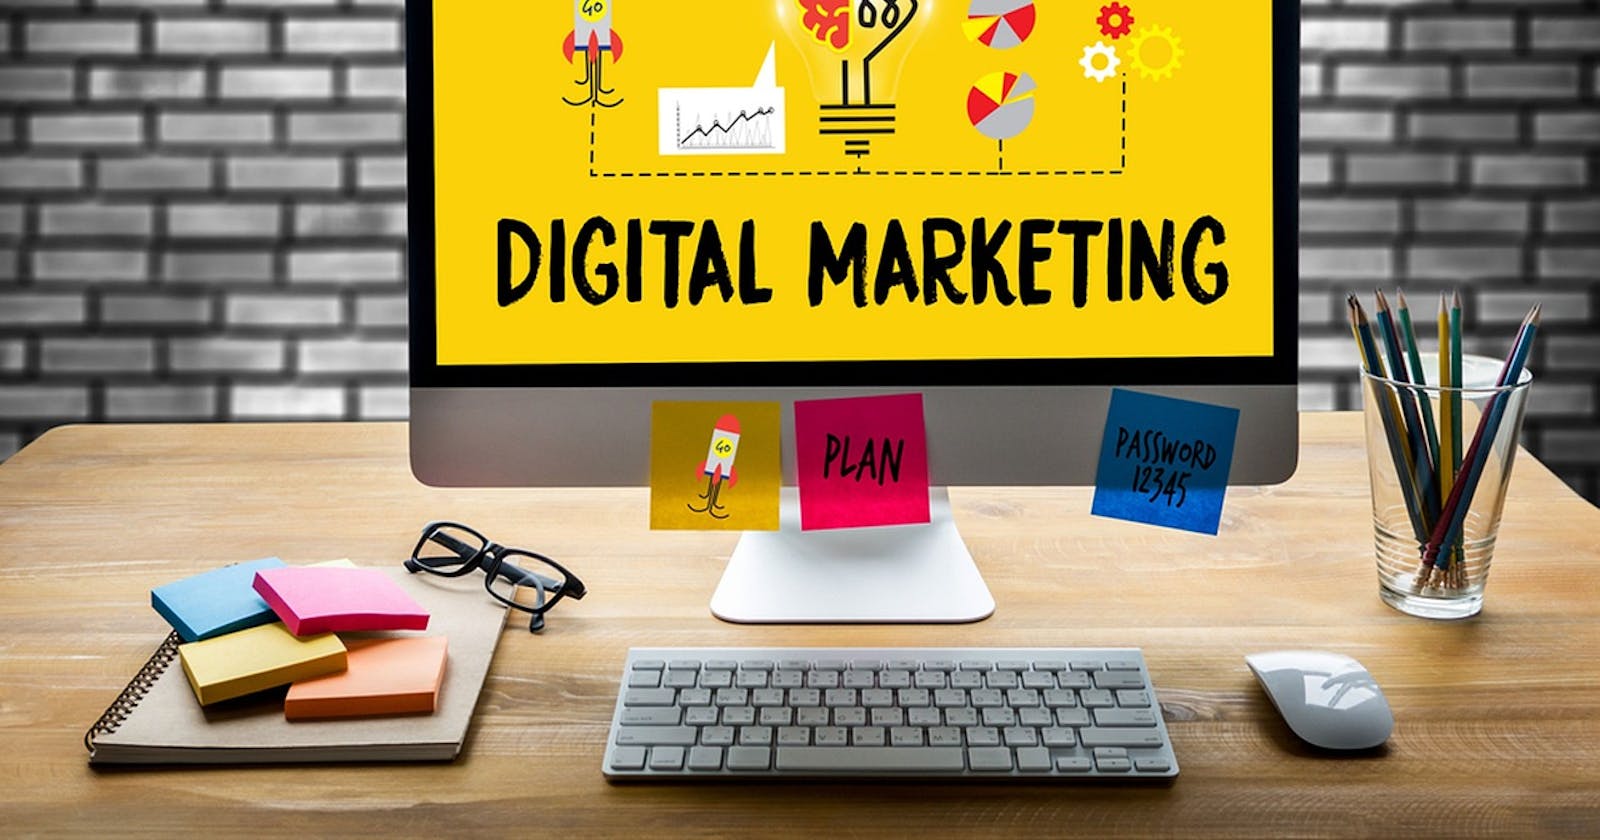 Digital Marketing: An approach to business expansion.